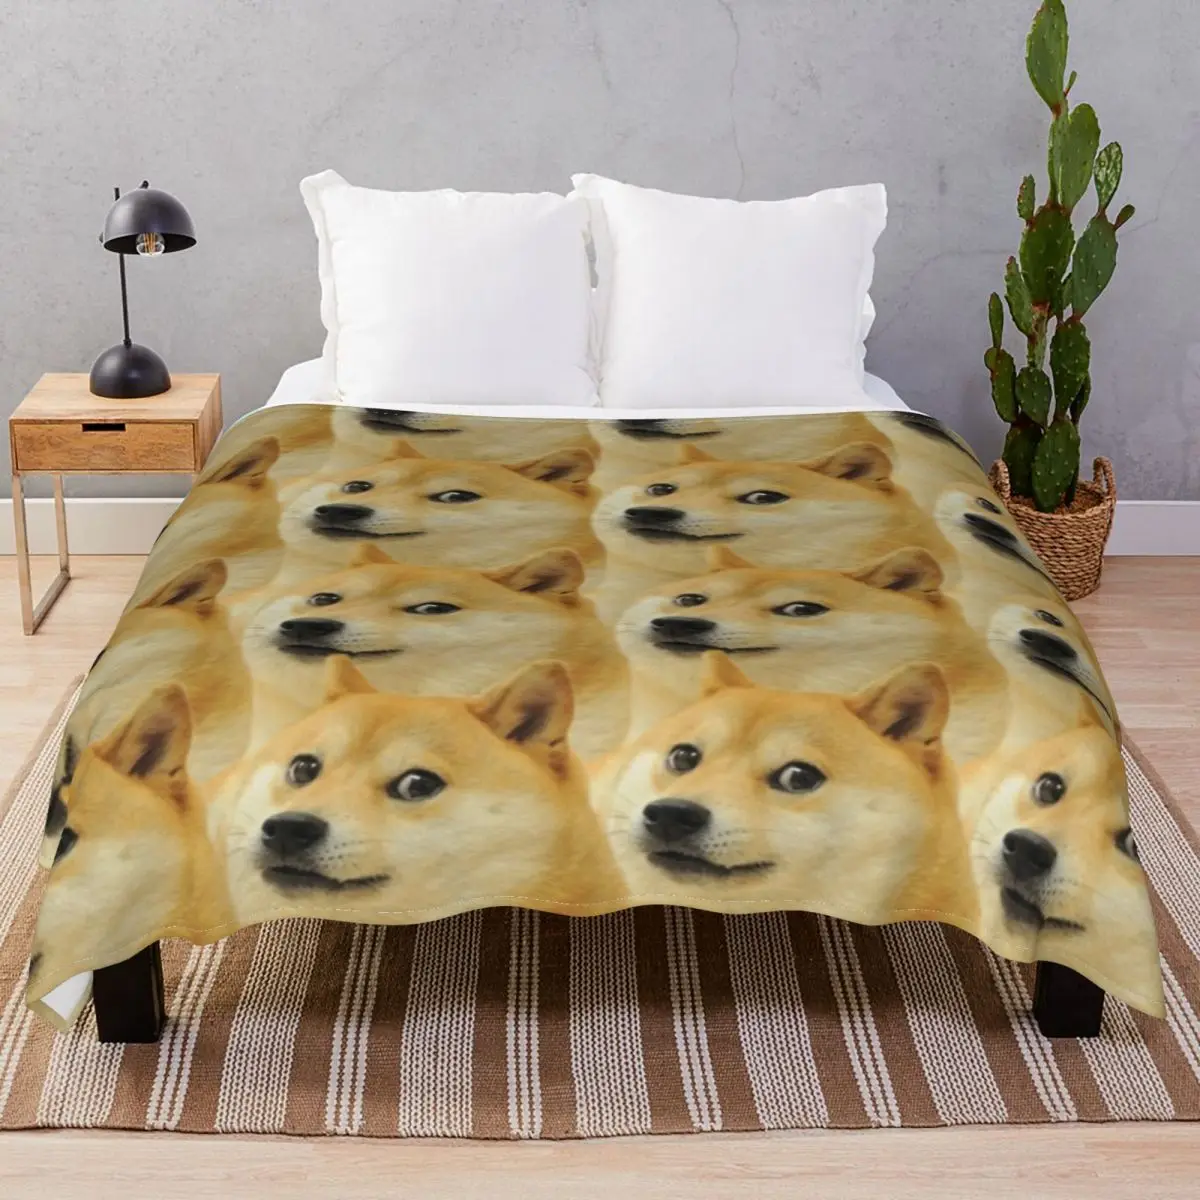 Doge Collage Blankets Flannel Winter Super Warm Throw Blanket for Bedding Home Couch Travel Cinema